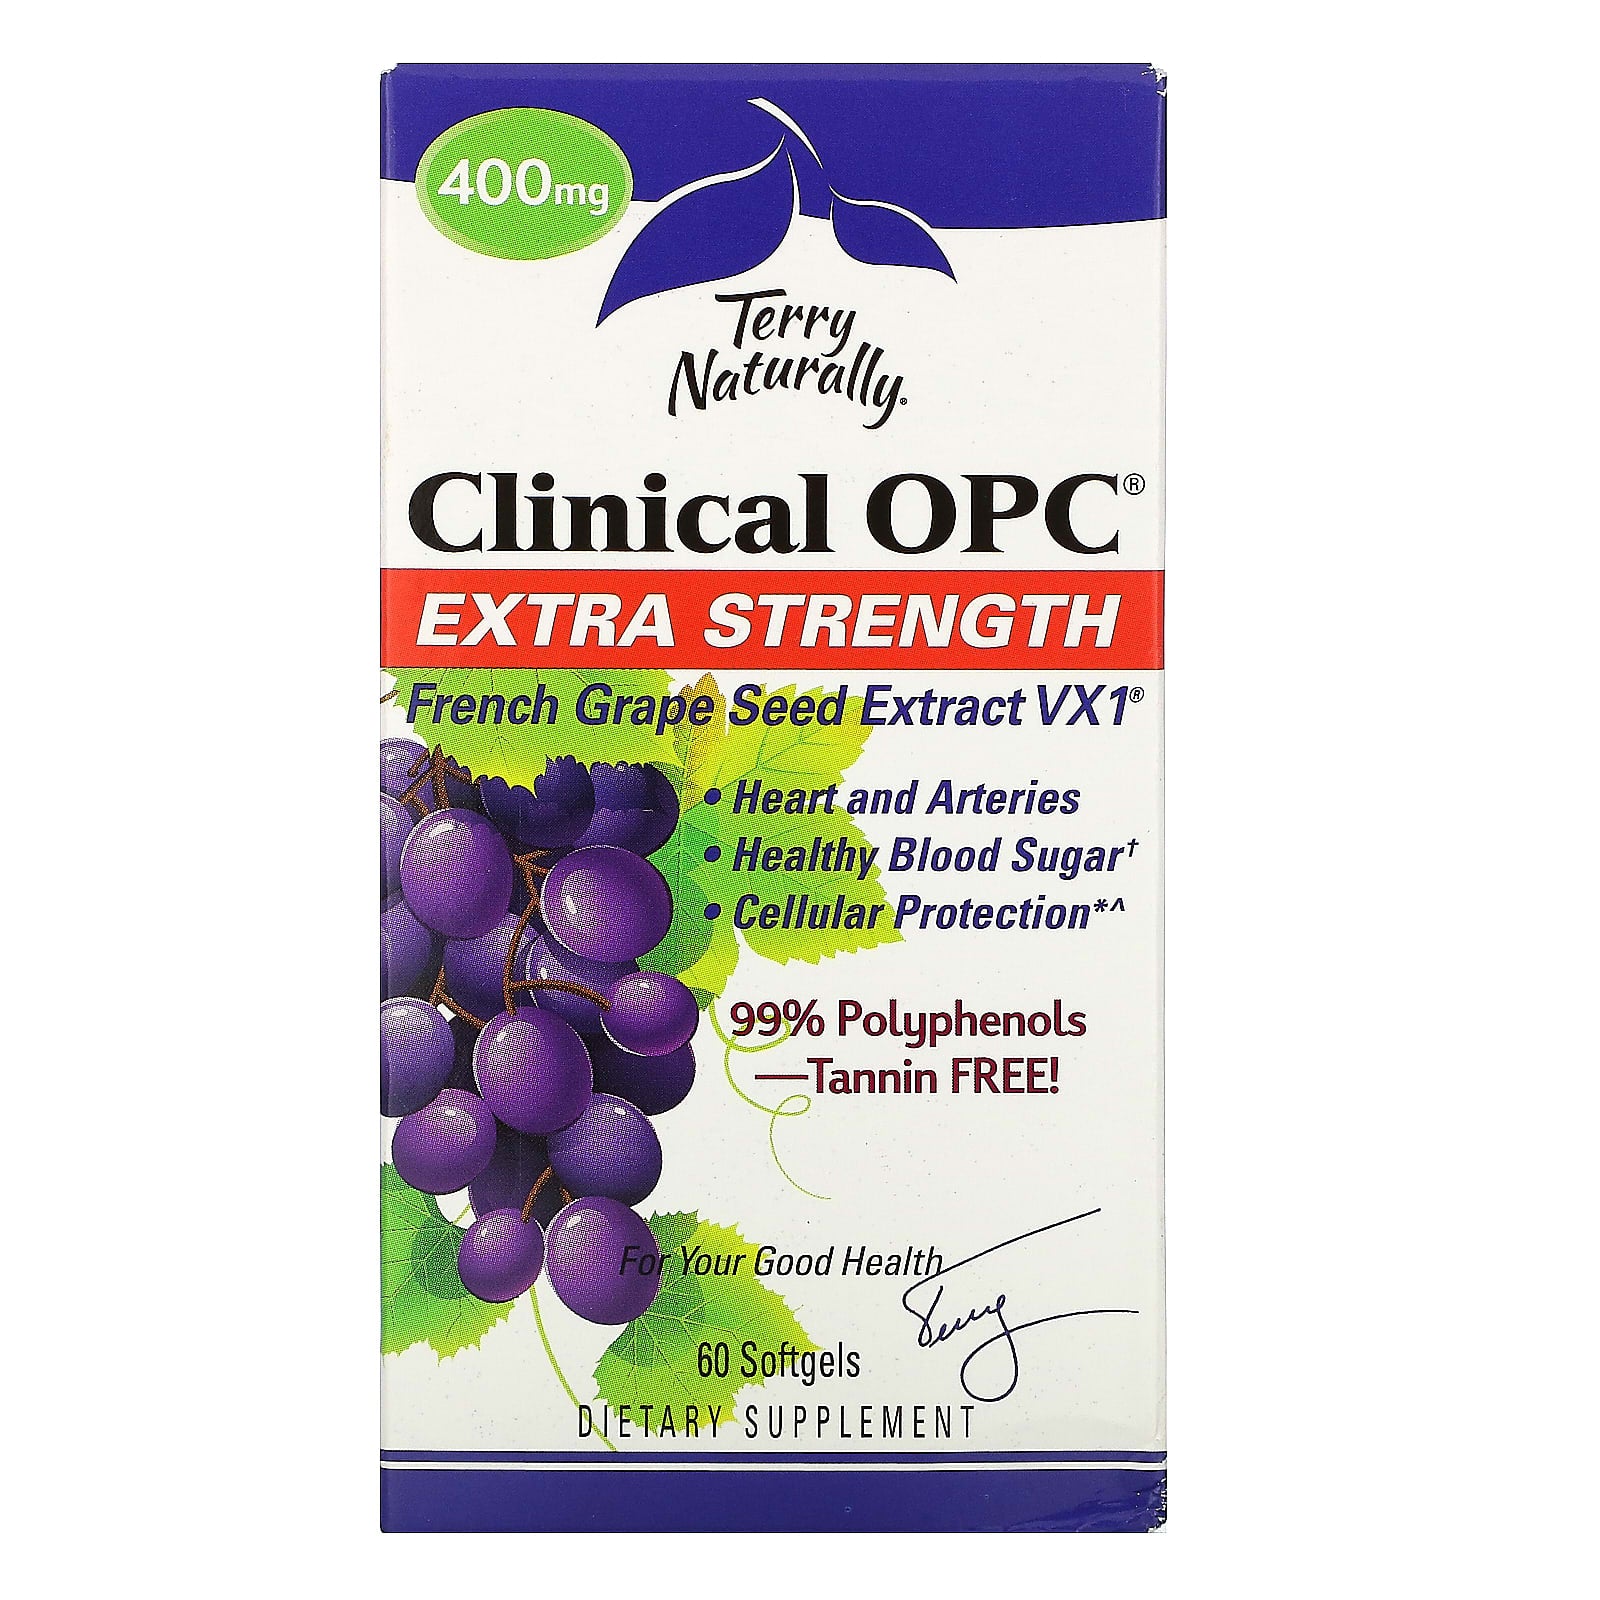 Clinical OPC® Extra Strength 400mg (60 Softgels)